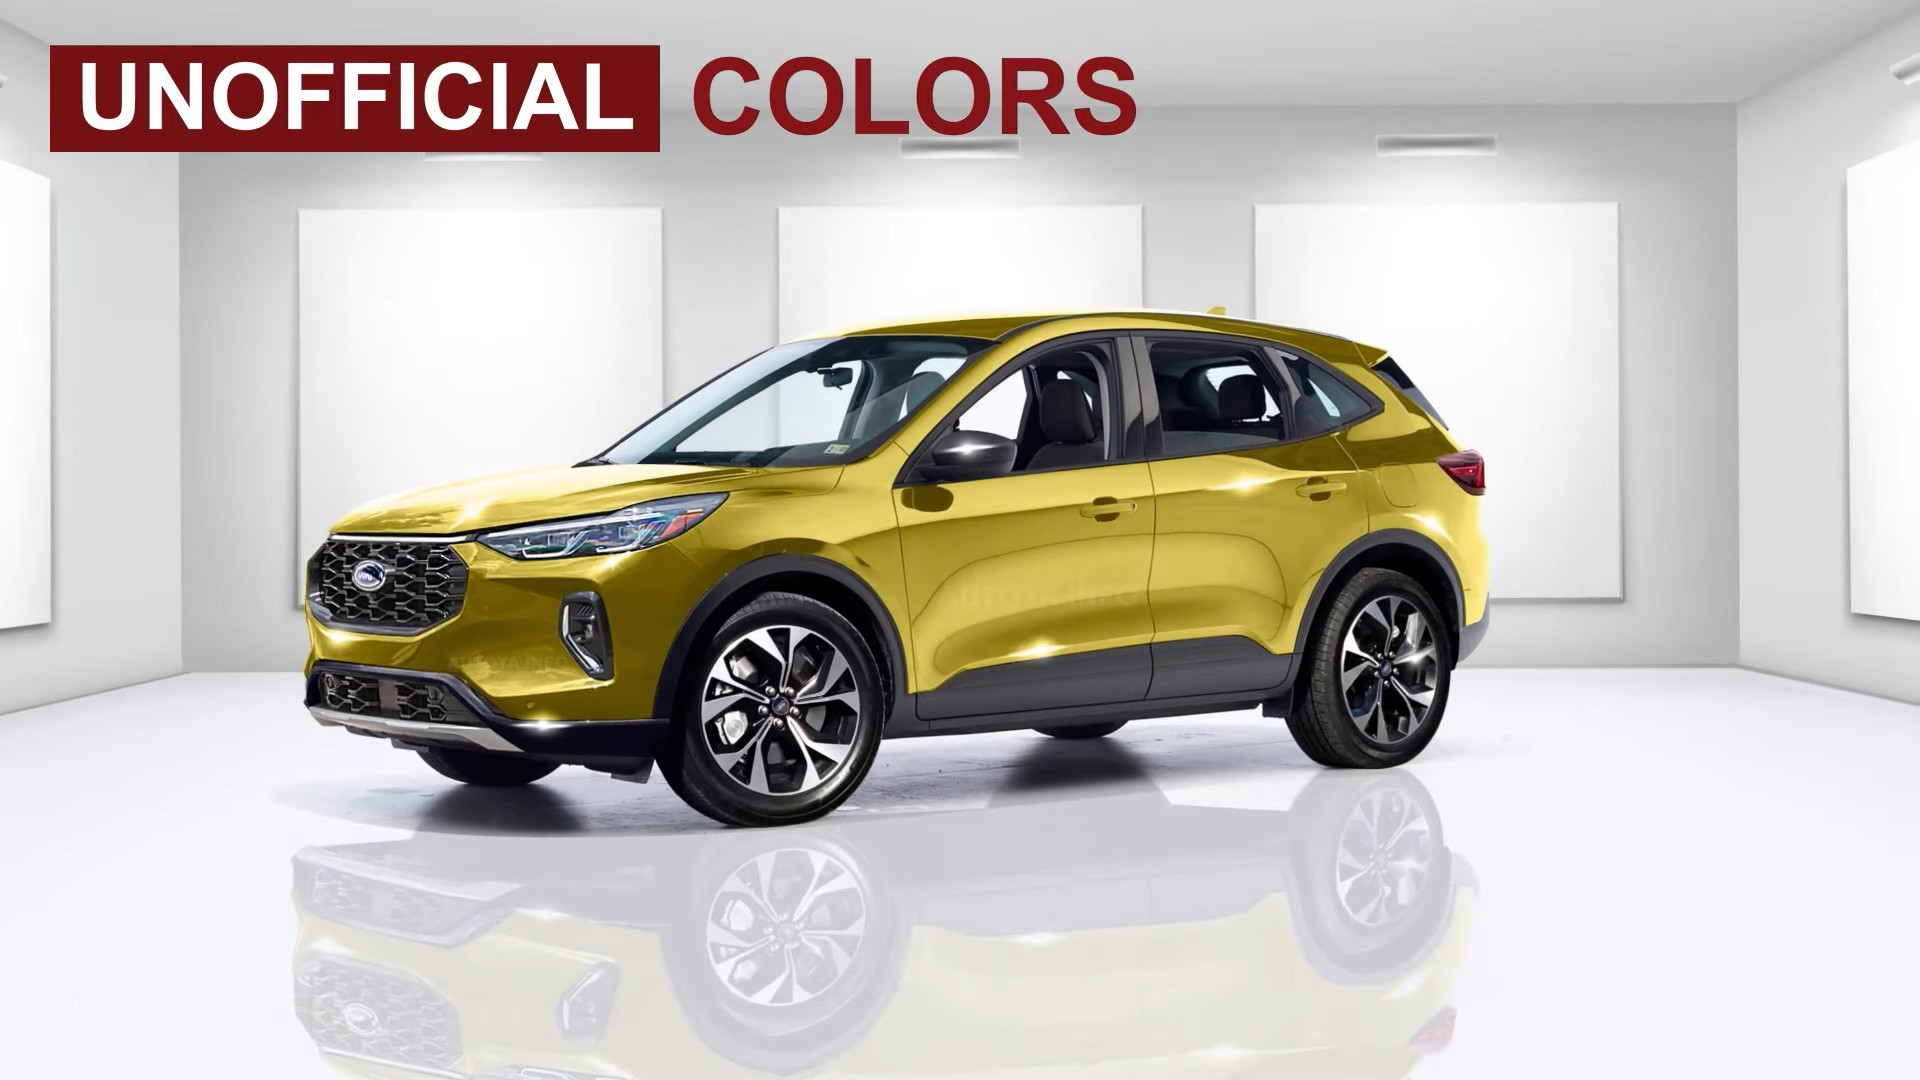 2023 Ford Escape (Kuga) Gets an Unofficial Interior and Color Palette